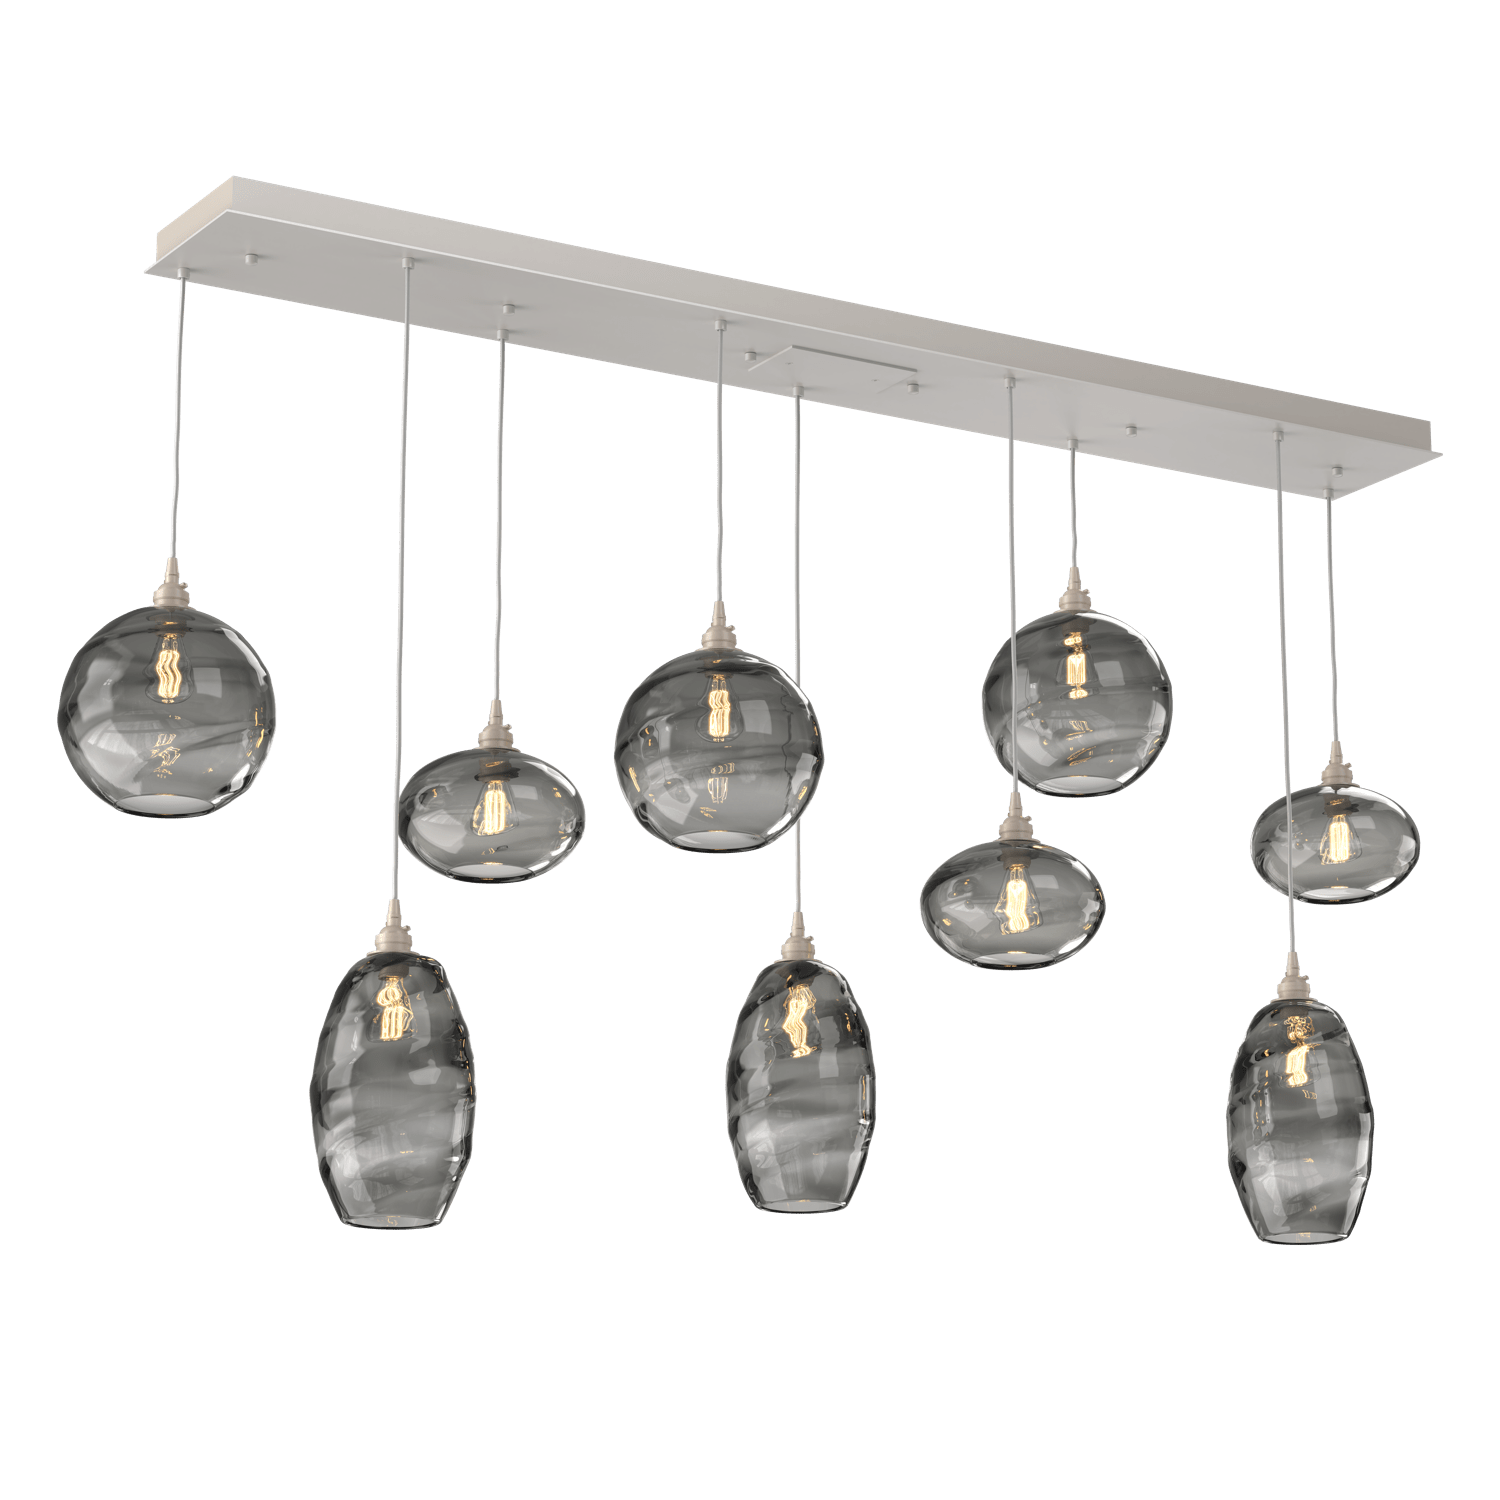 PLB0048-09-BS-OS-Hammerton-Studio-Optic-Blown-Glass-Misto-9-light-linear-pendant-chandelier-with-metallic-beige-silver-finish-and-optic-smoke-blown-glass-shades-and-incandescent-lamping